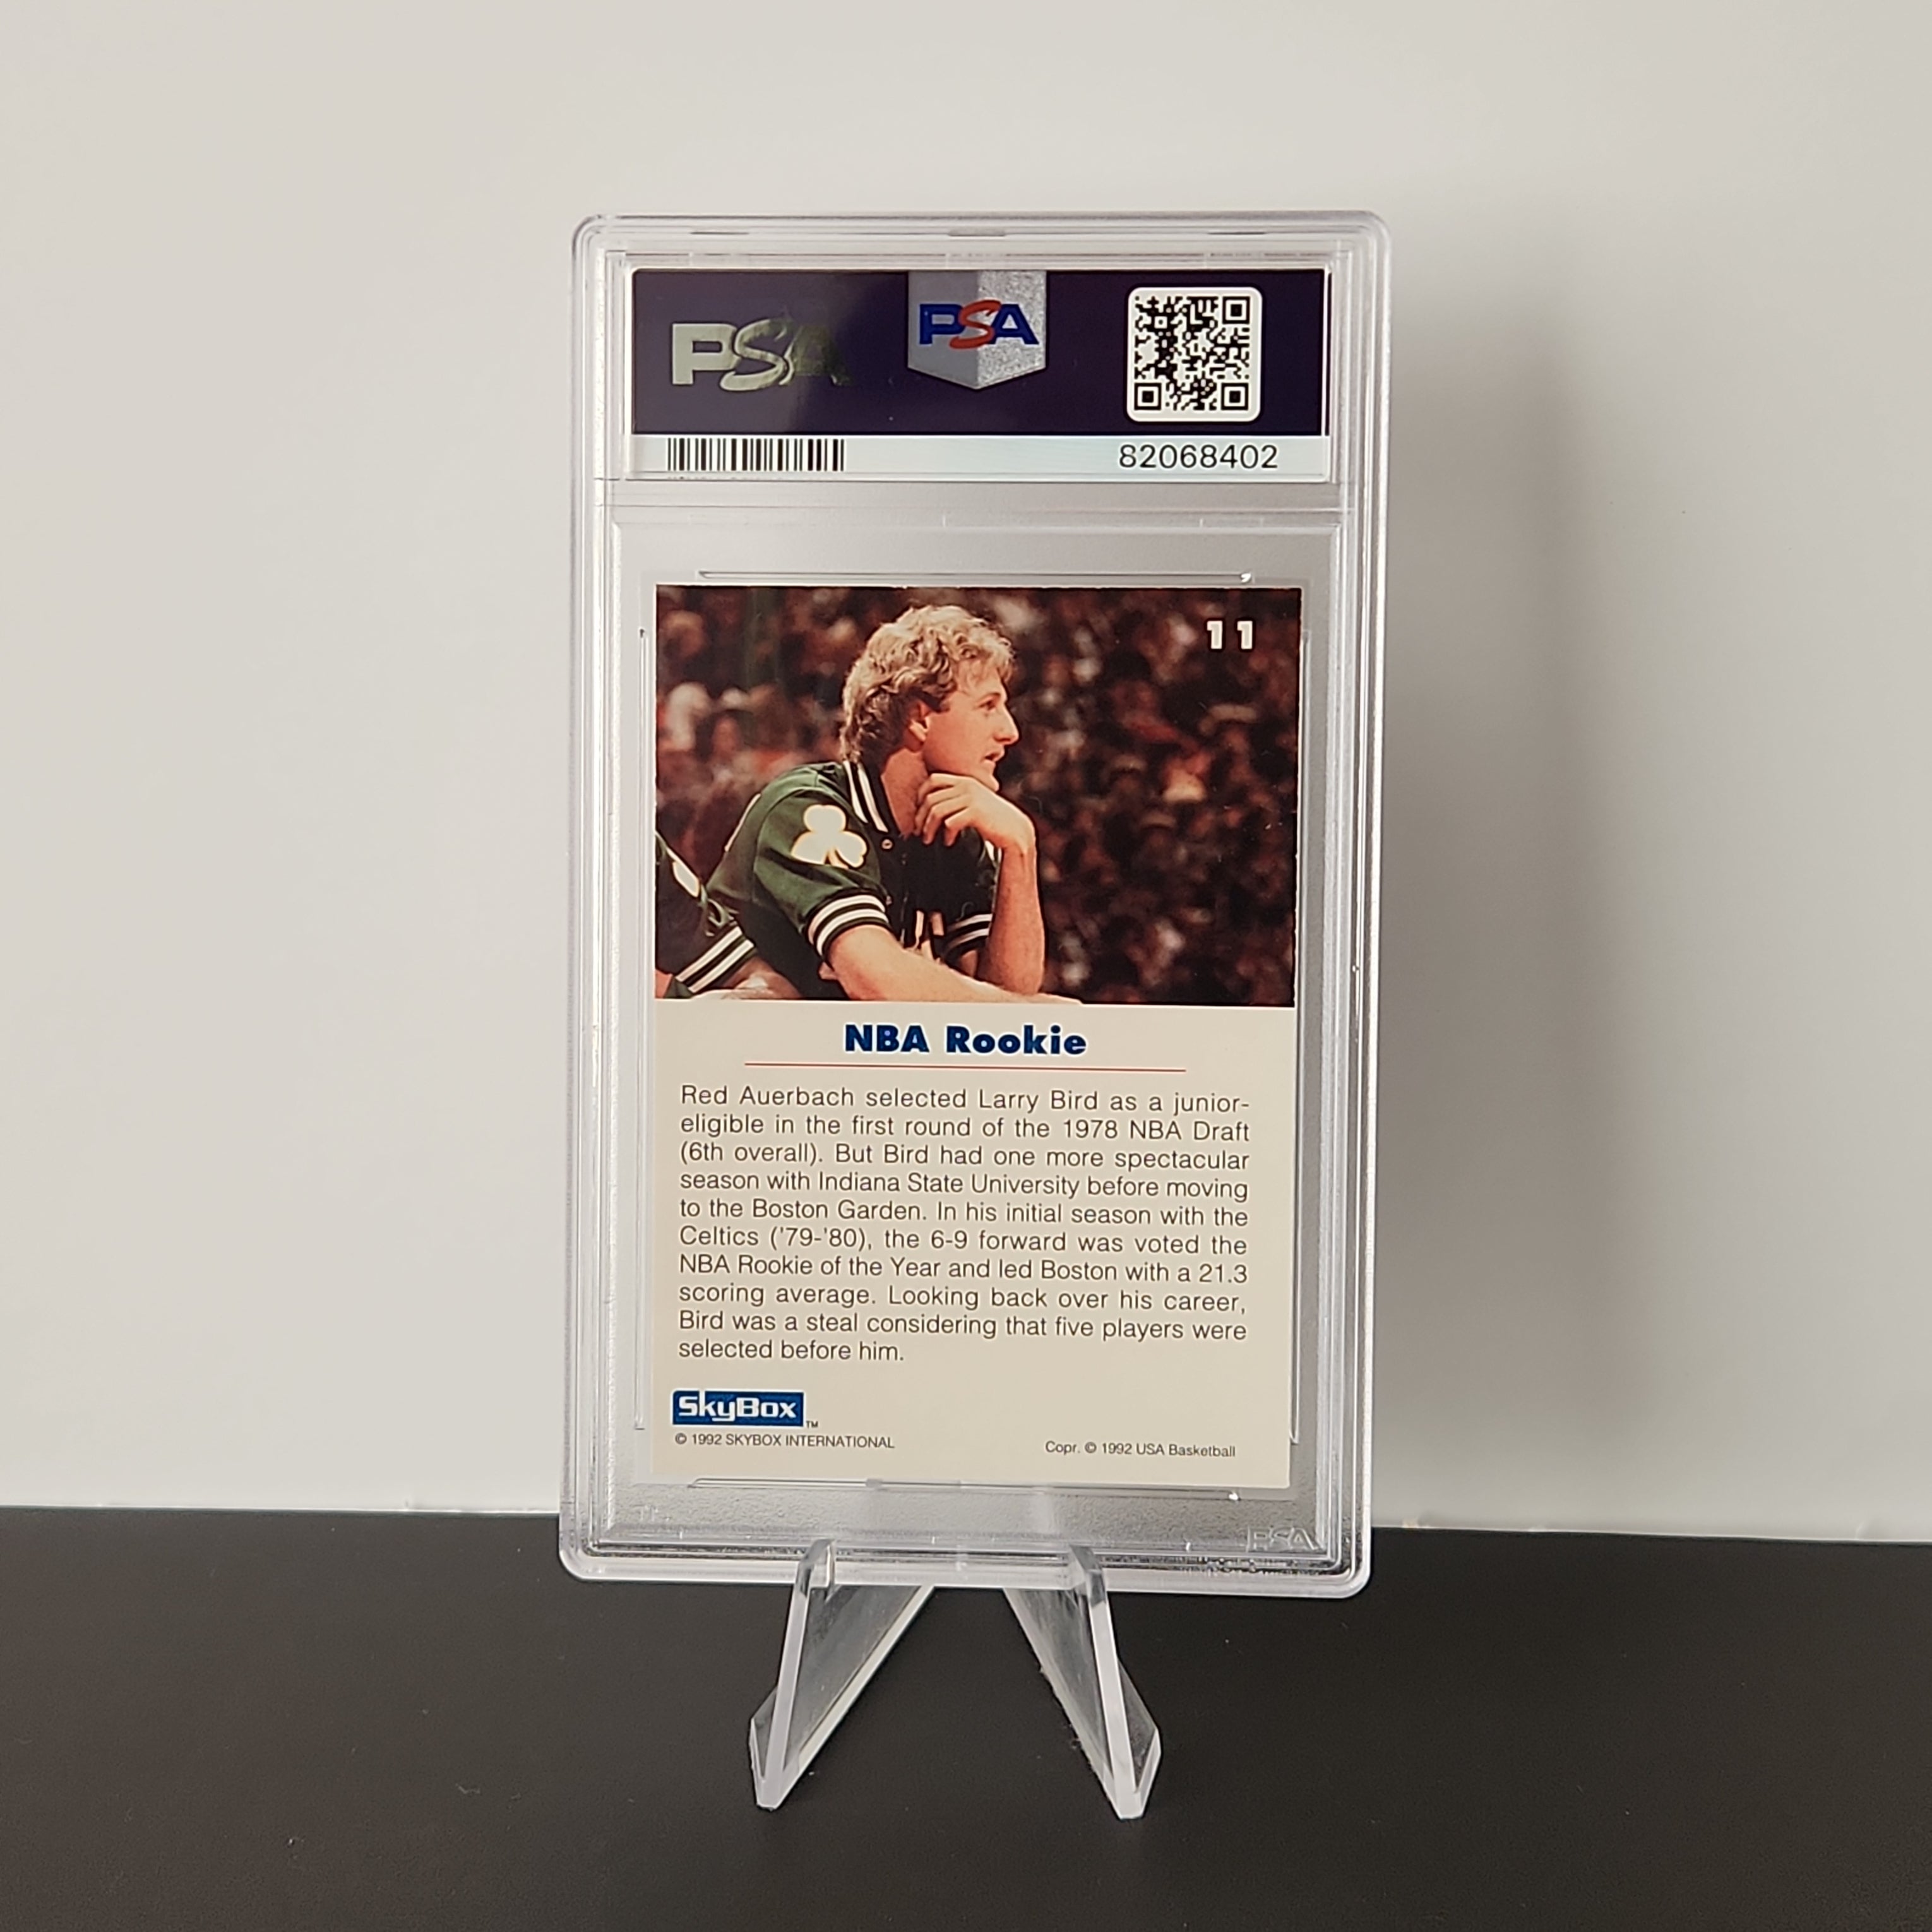 Larry Bird 1992/93 Skybox USA Basketball #11 **PSA MINT 9** - Premium  from 1of1 Collectables - Just $112! Shop now at 1of1 Collectables